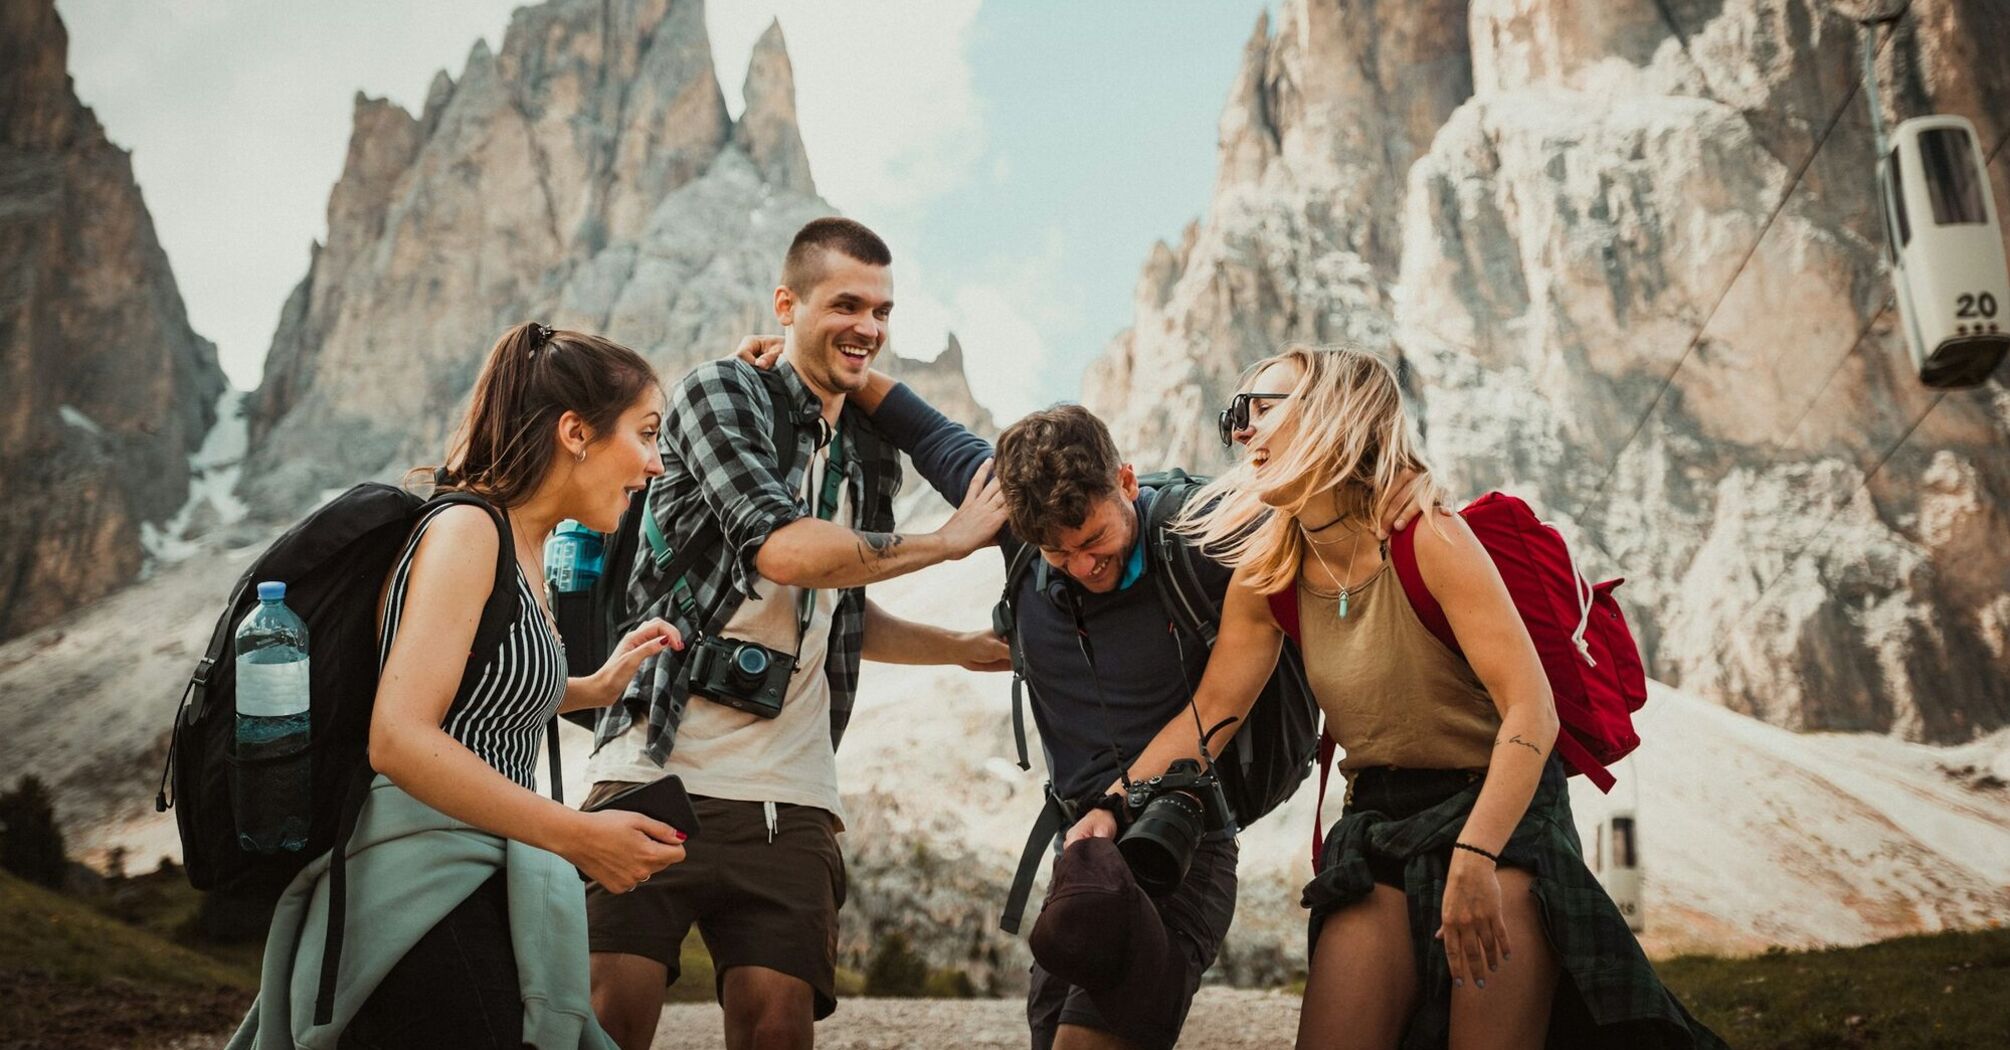 Group of friends laughing and hiking in the mountains, enjoying a sunny day outdoors